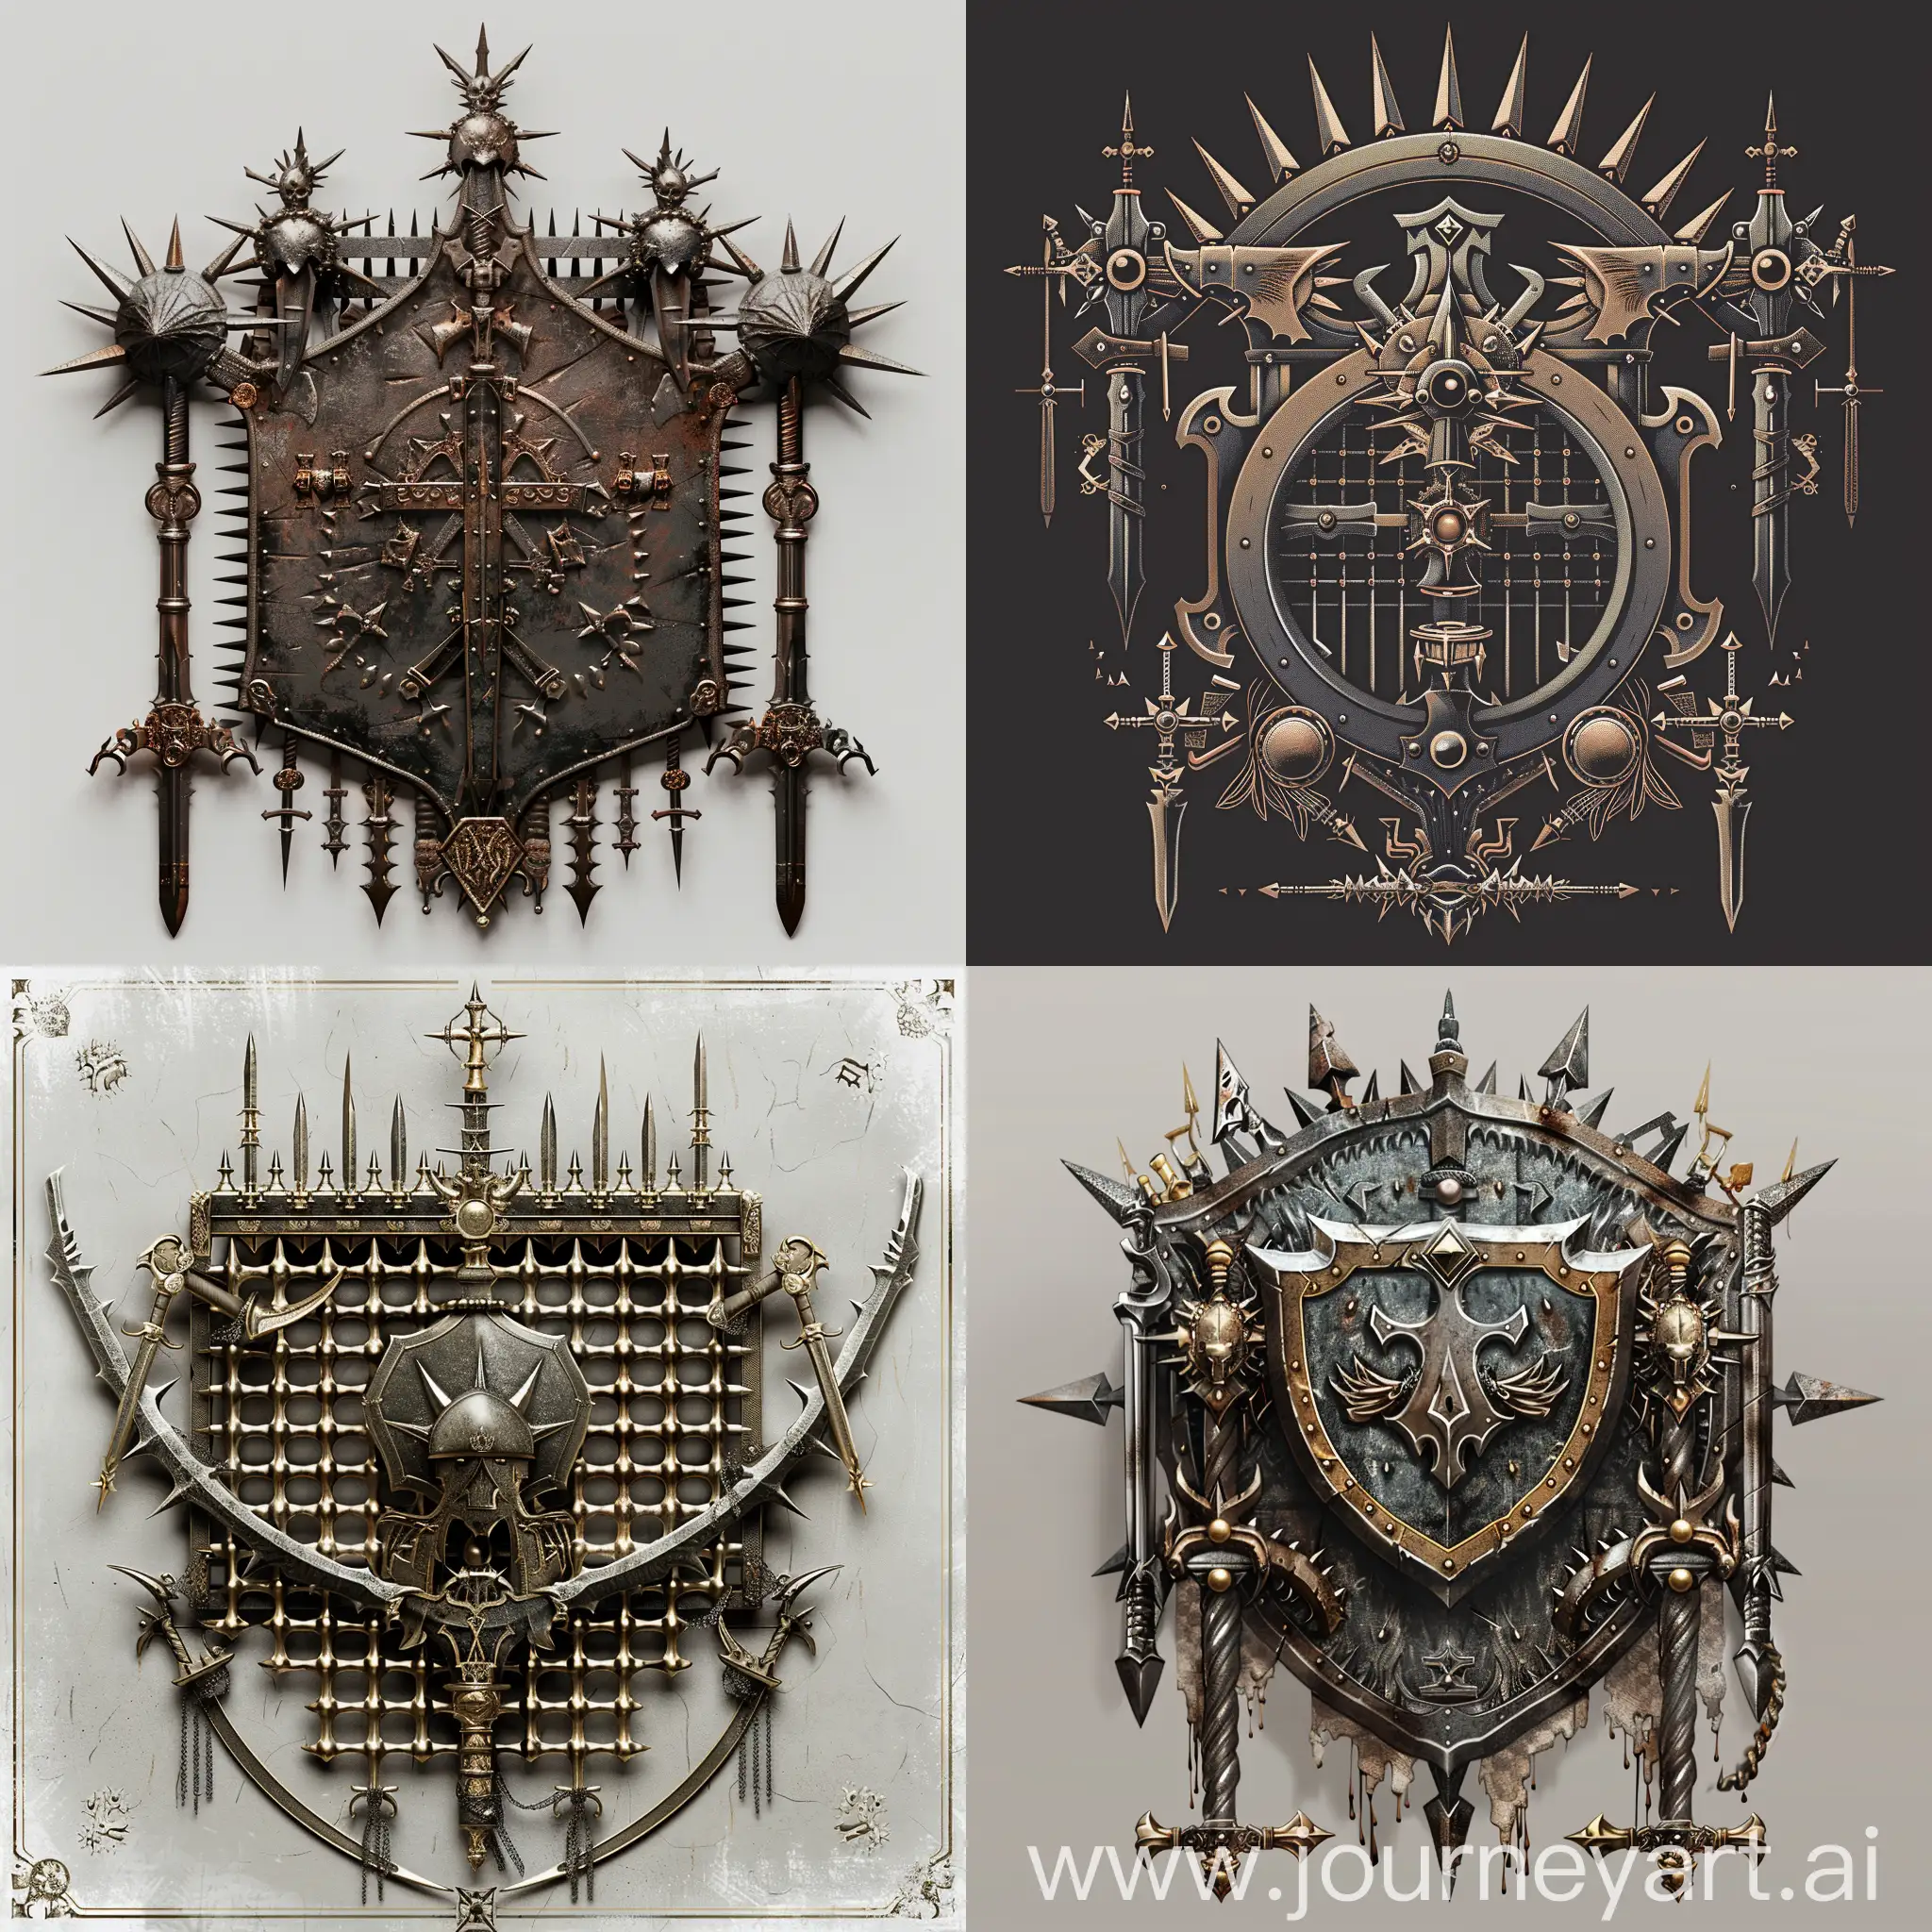 Fantasy-Kingdom-Coat-of-Arms-with-Spiky-Metal-Grating-and-Weaponry